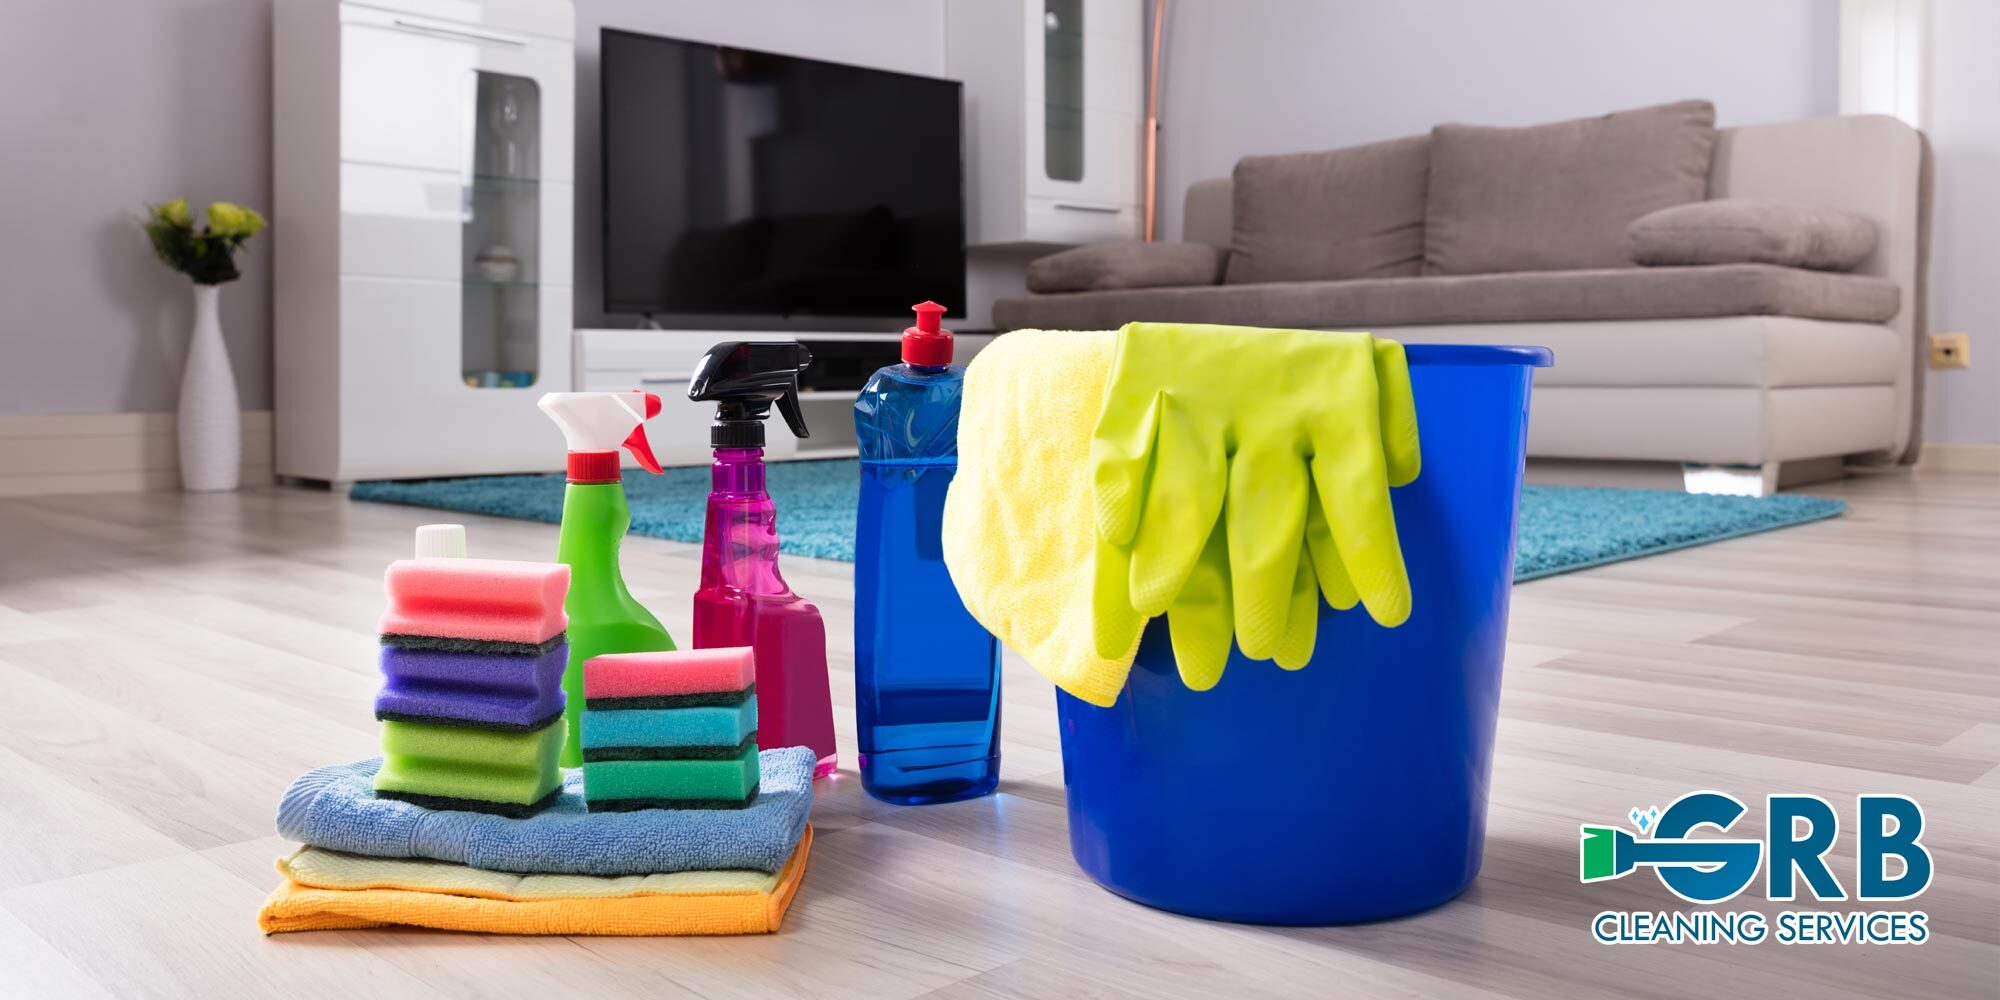 Livingroom Cleaning Services - GRB Cleaning Services